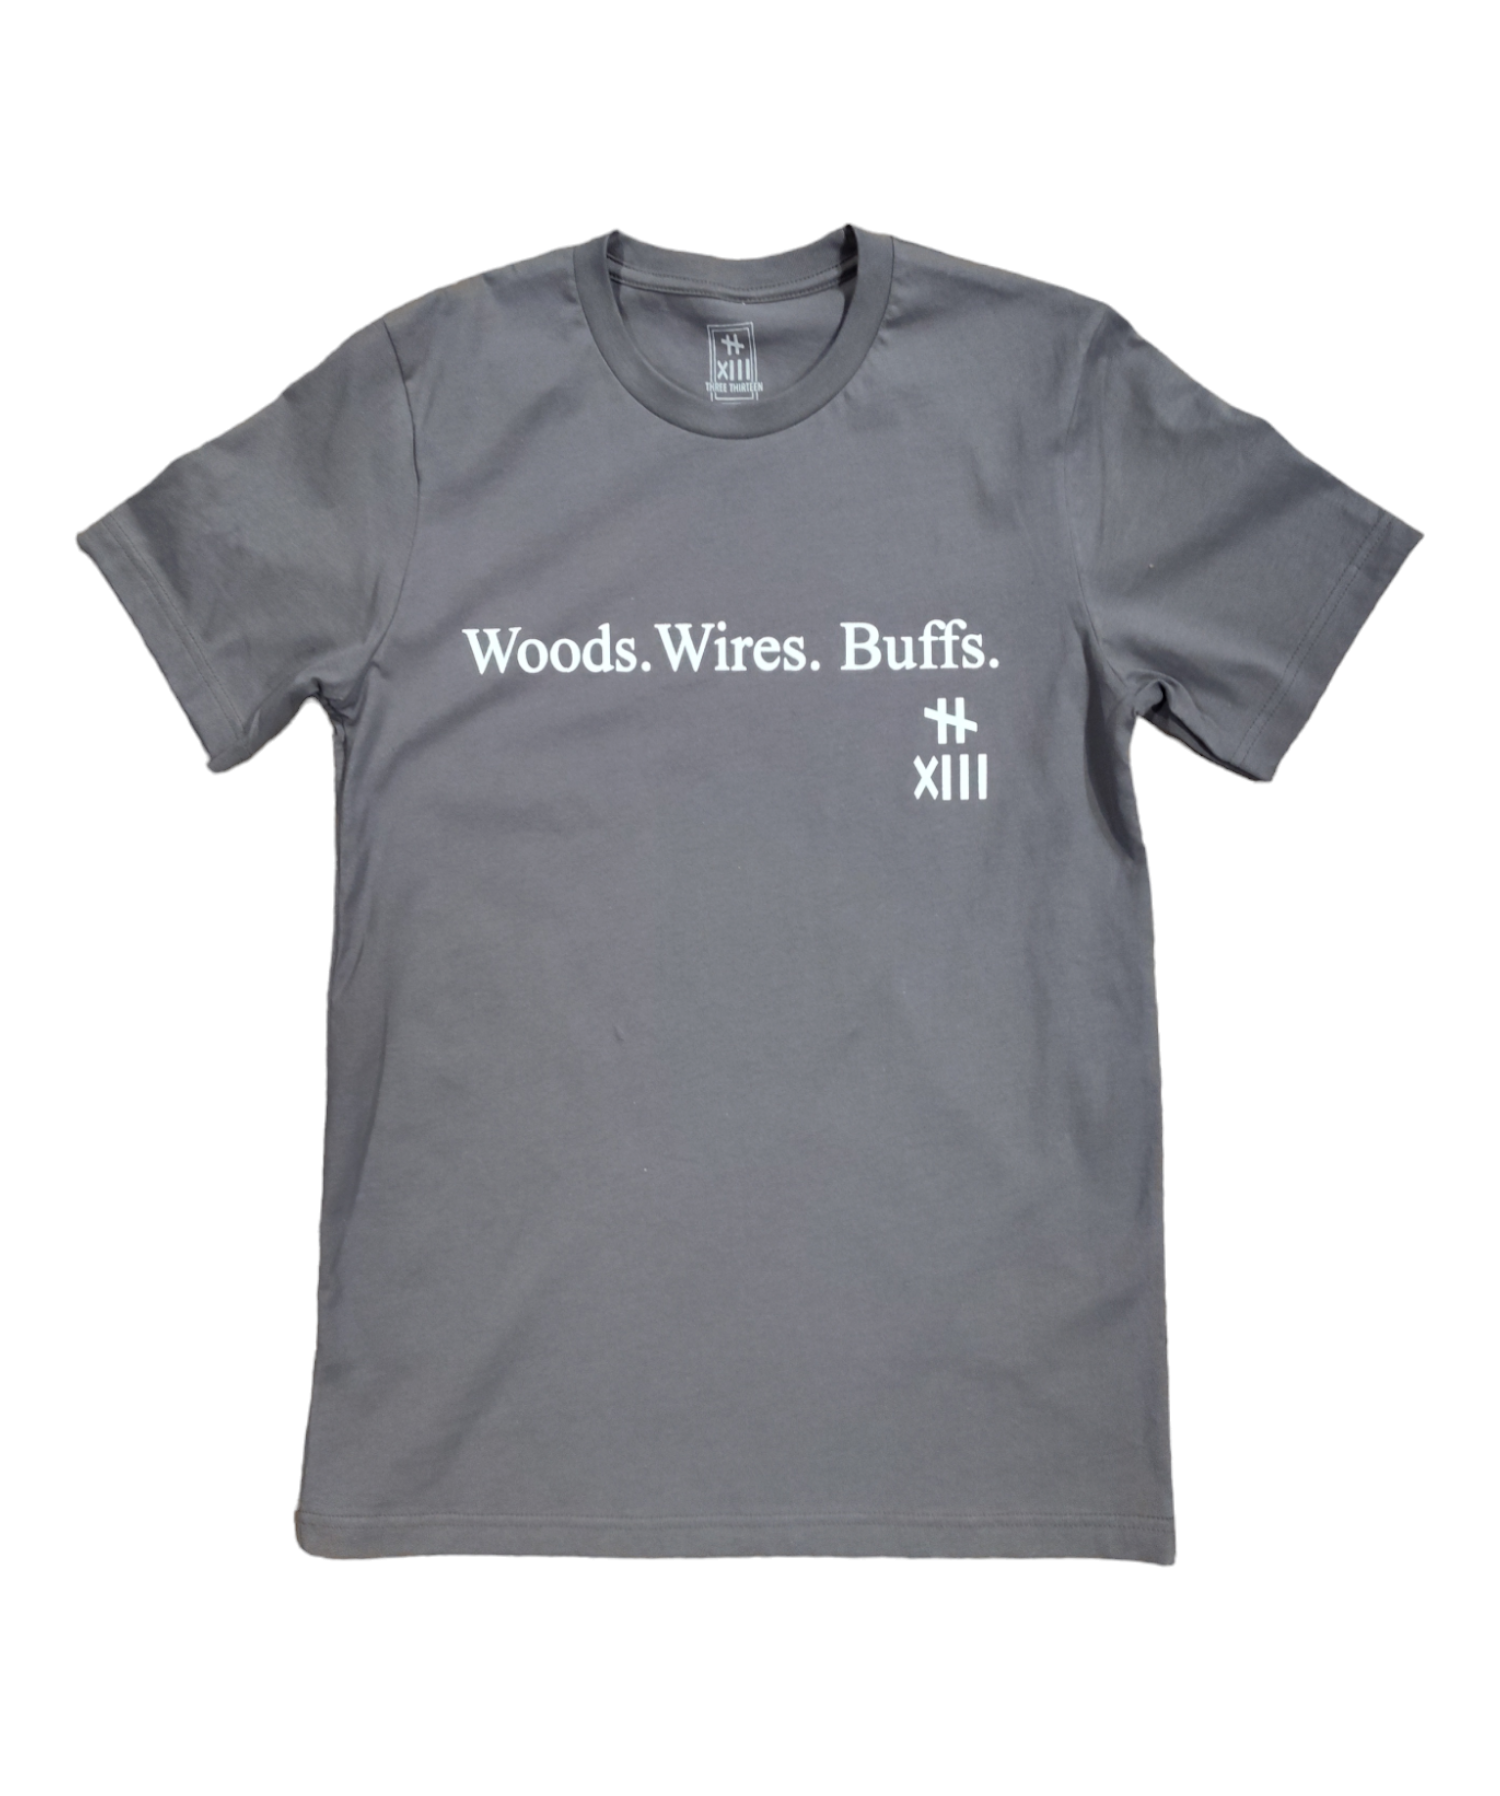 313 WOODS WIRES BUFFS TEE Gray